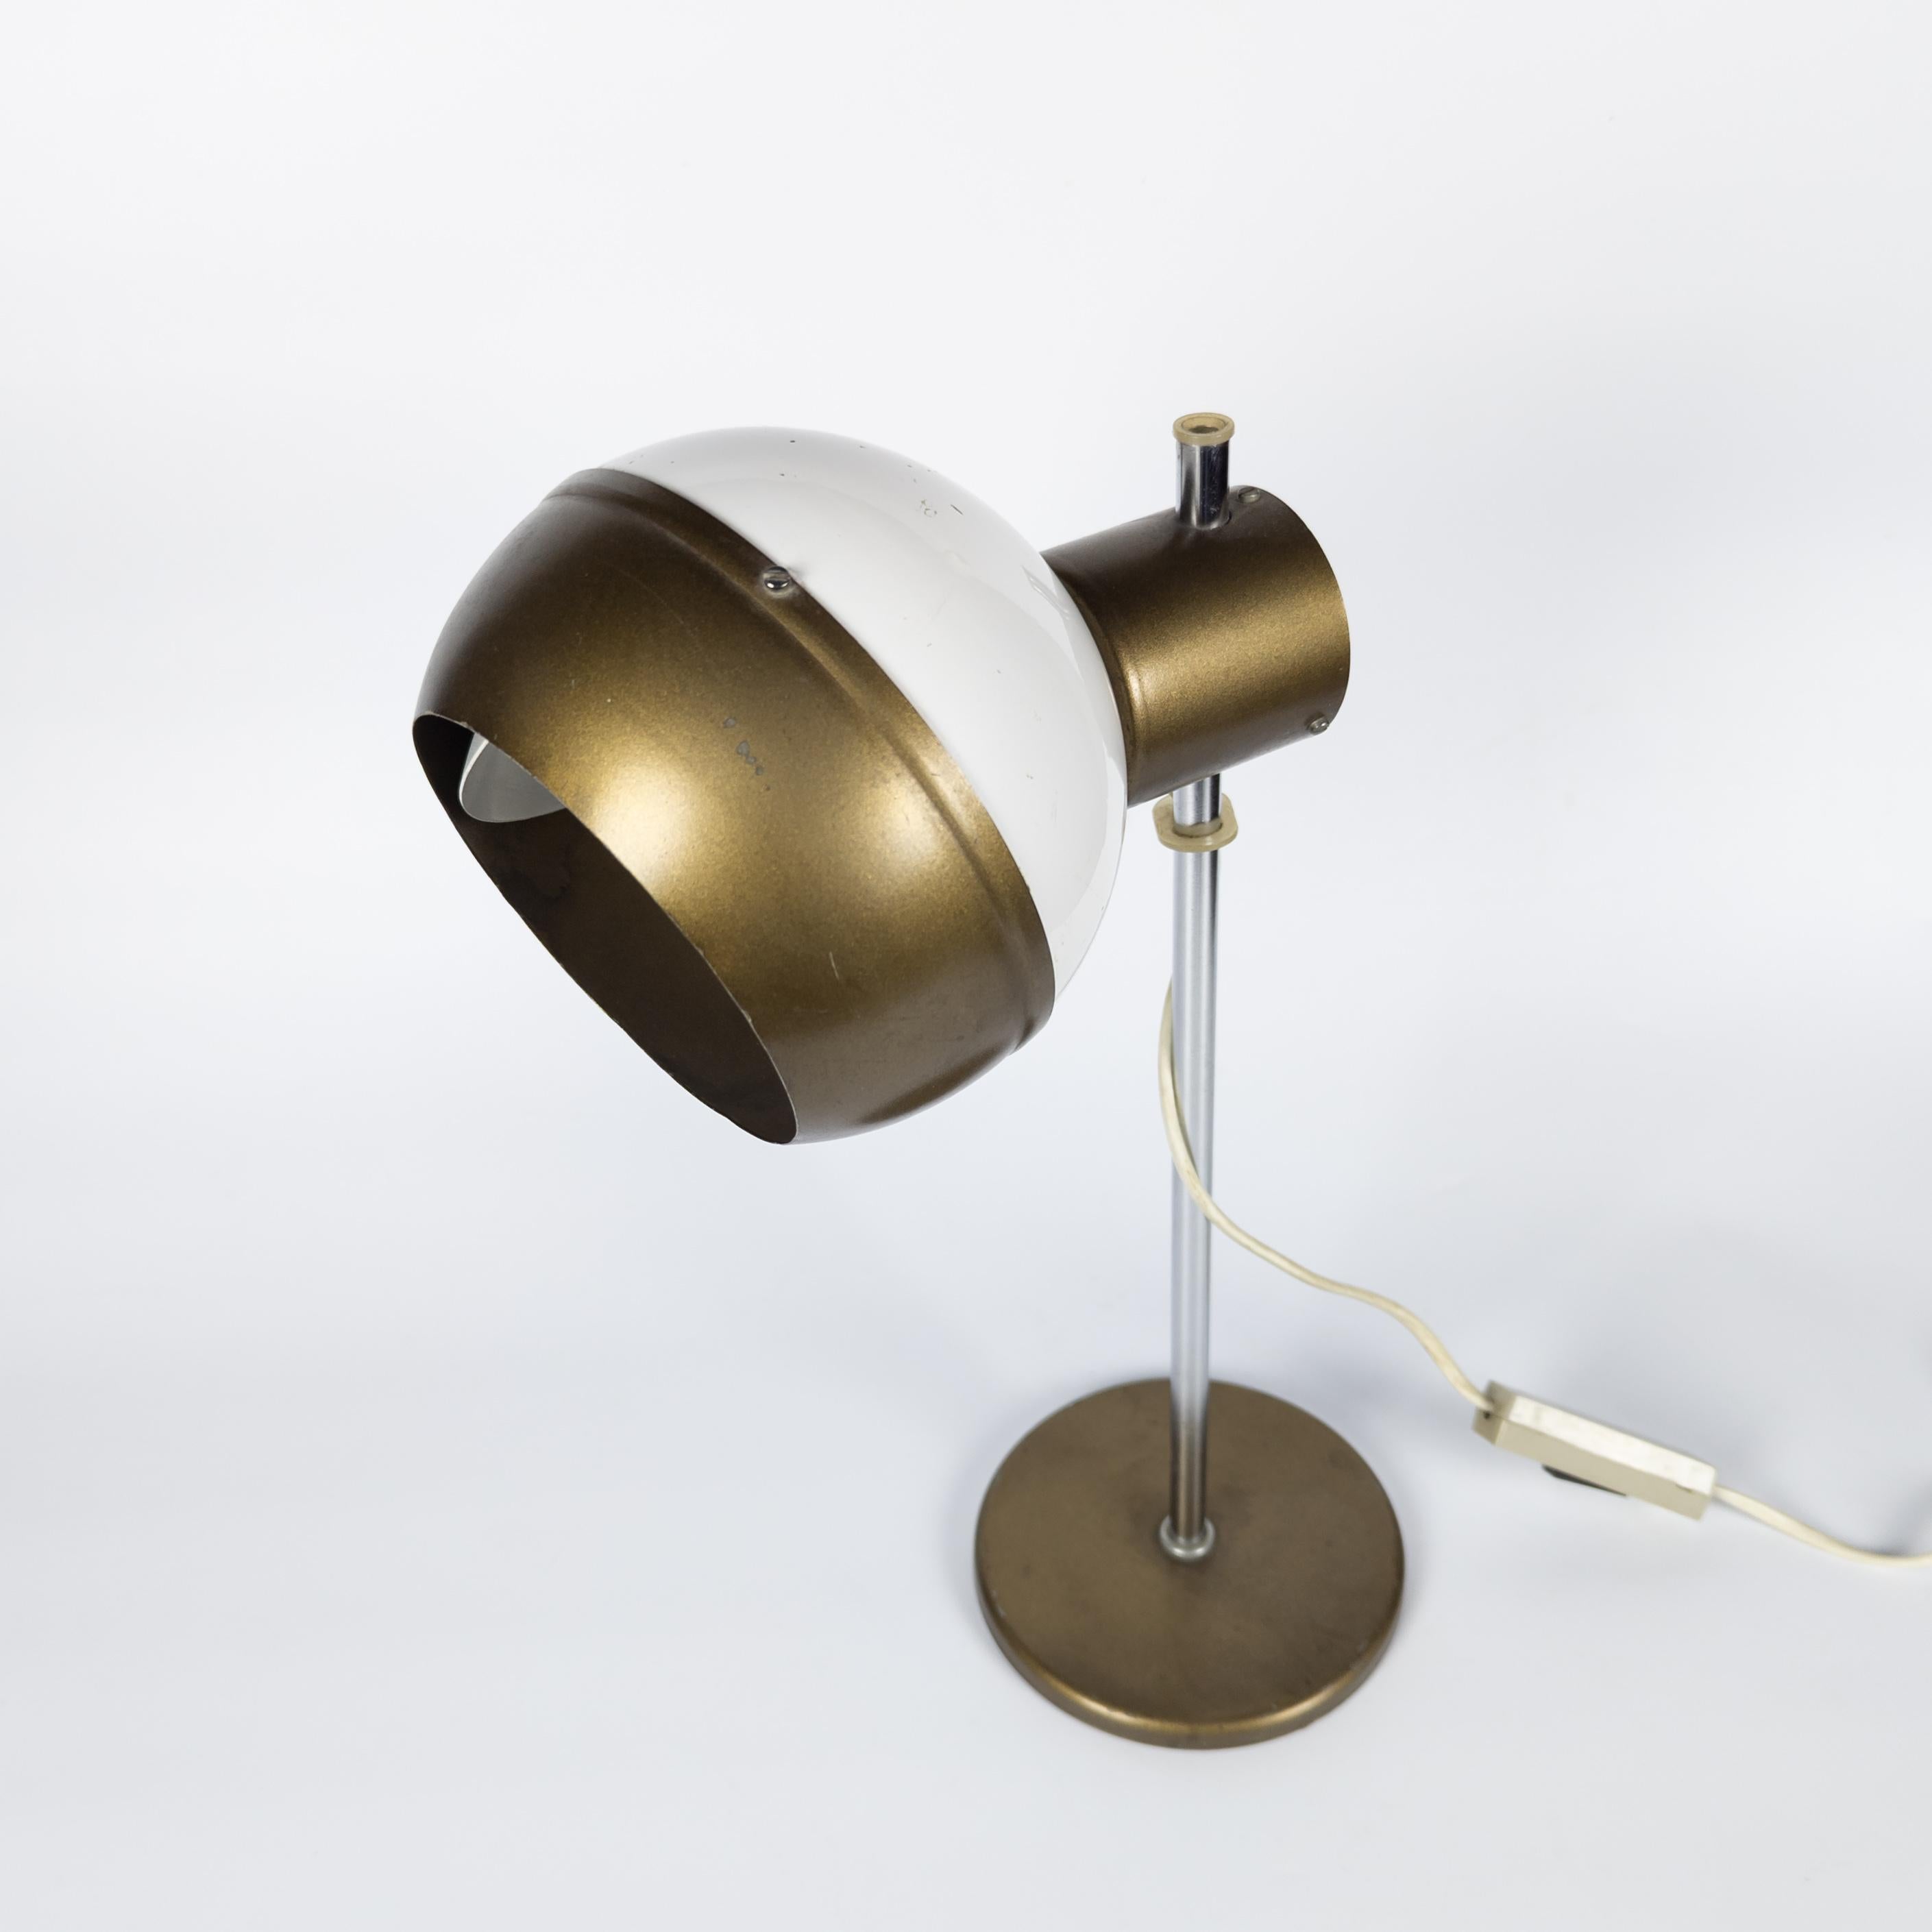 Adjustable space age lamp manufactured by Drukov, former Czechoslovakia in 1970's. Made of white and gold lacquered metal. The shade is held to the structure by means of a magnet and can be positioned in different ways. Manually dimmable using the